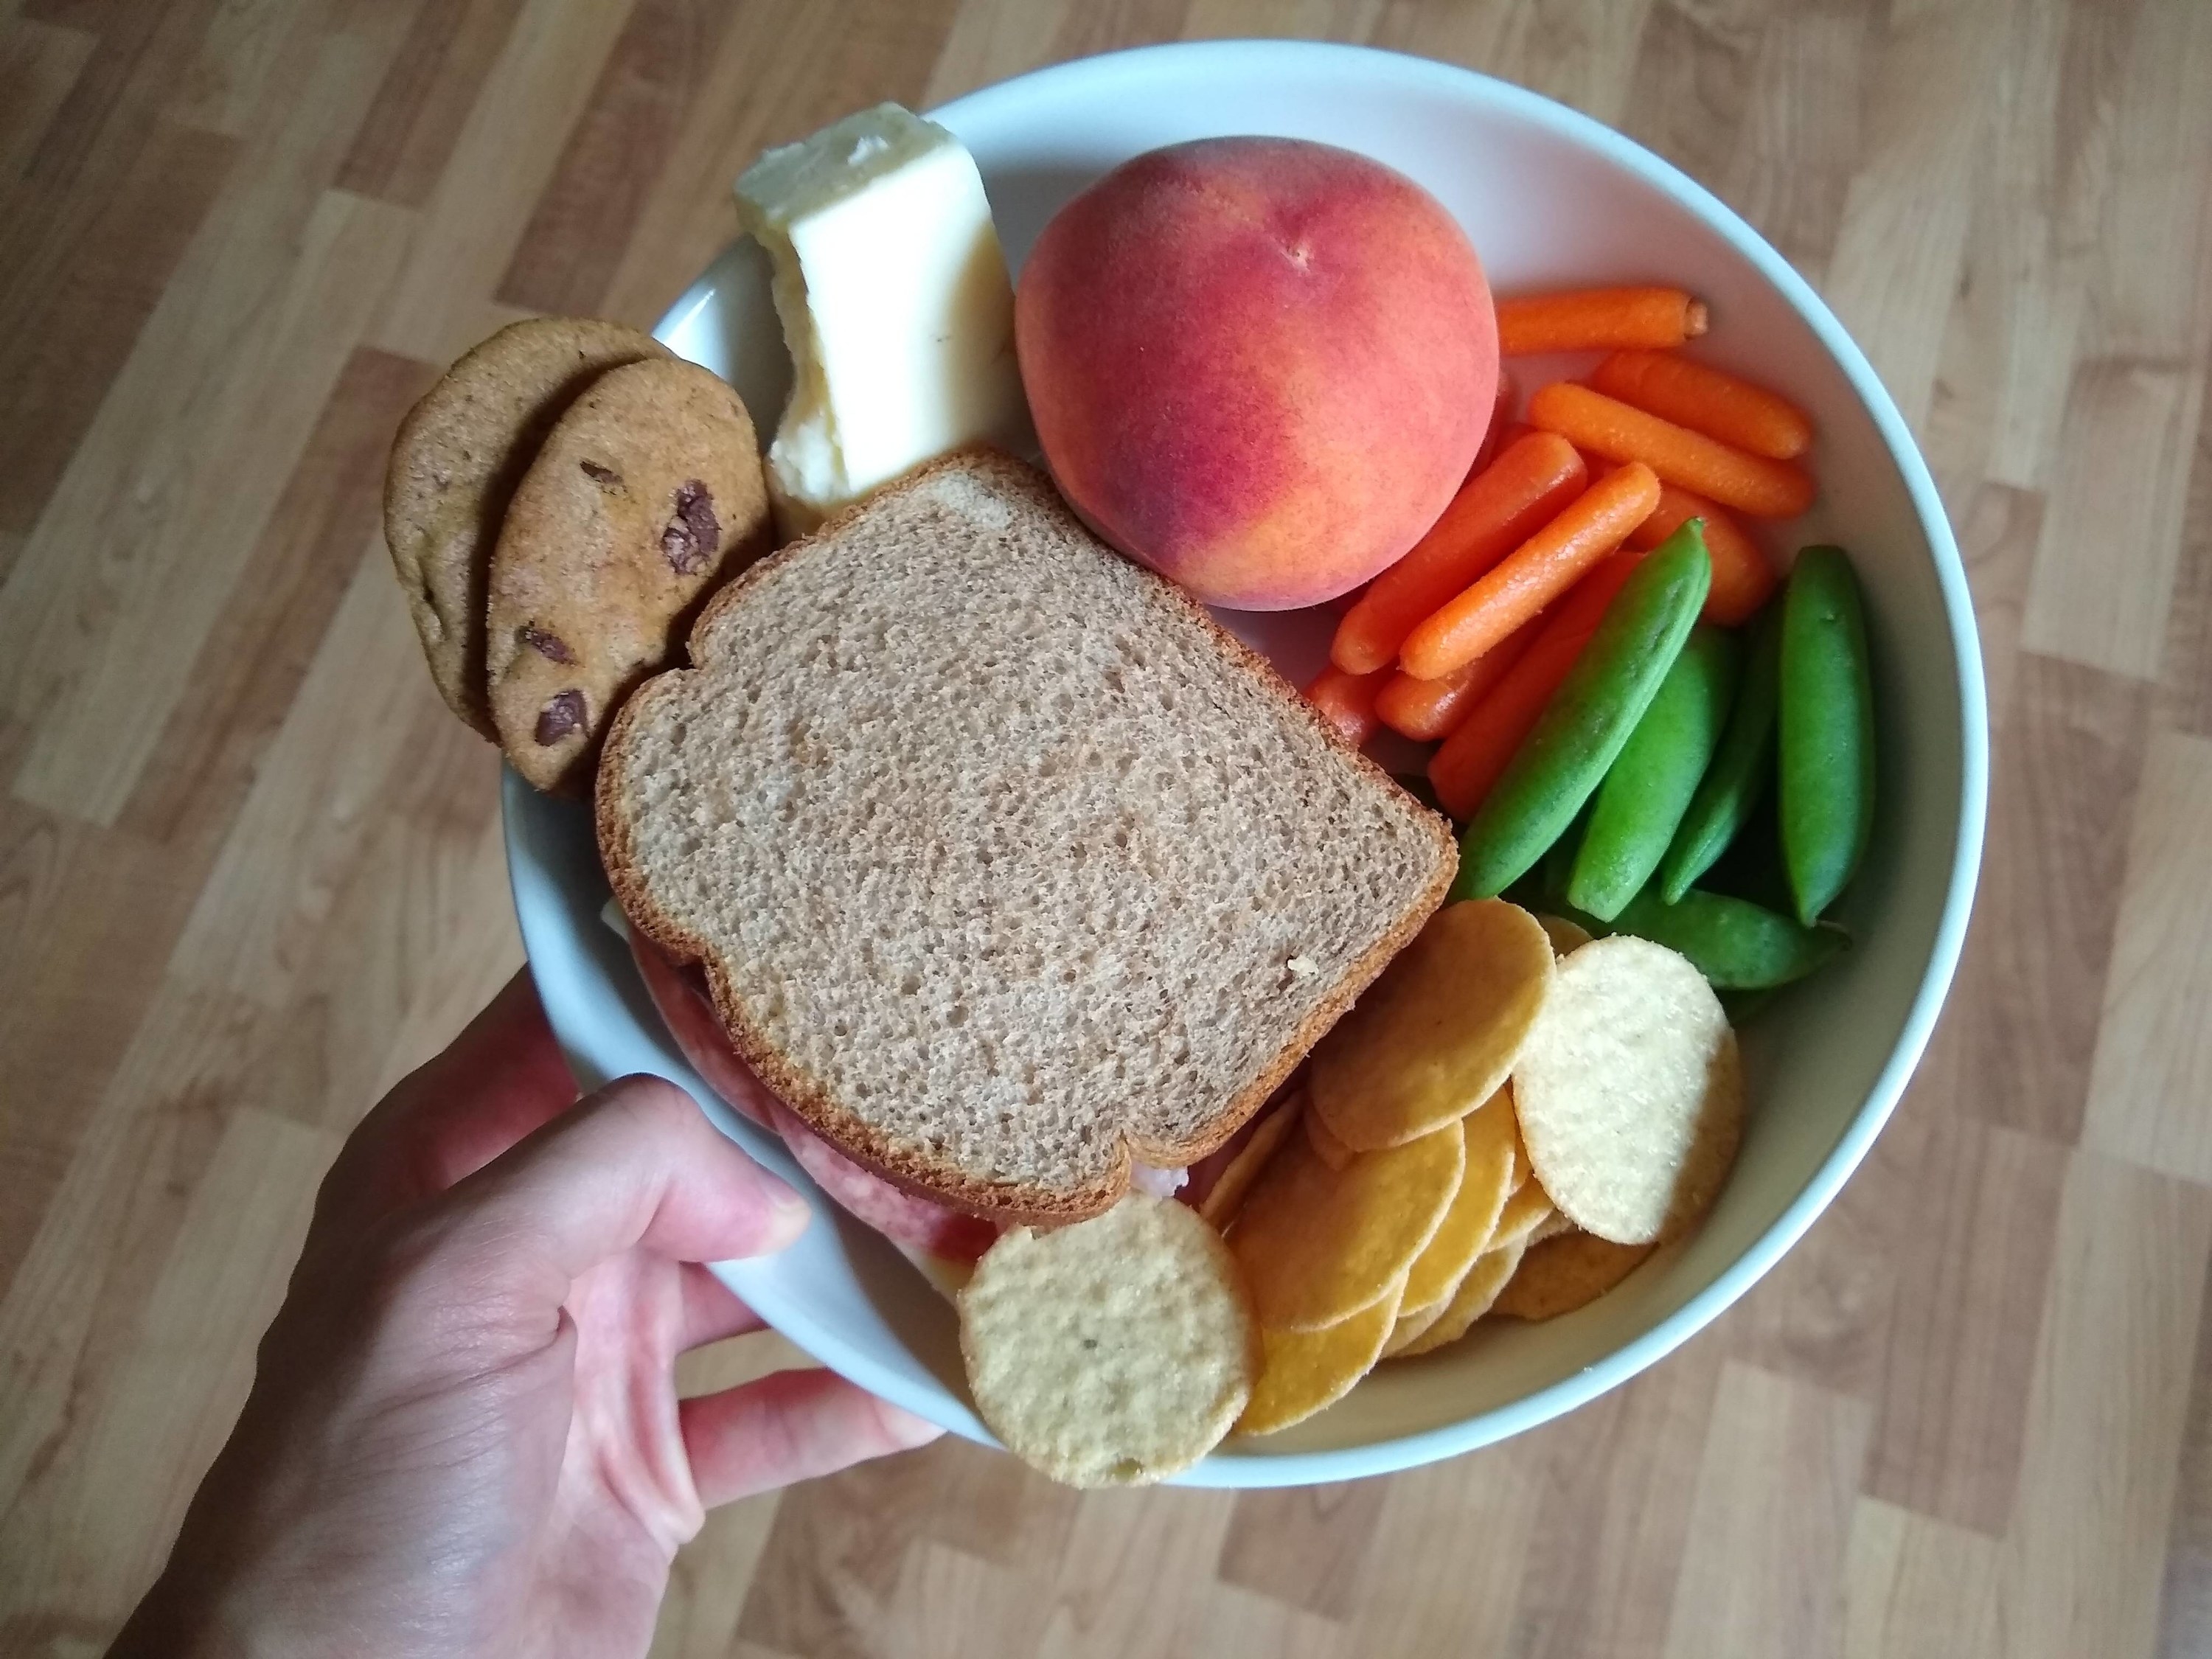 A bowl filled with random foods like bread, chips, carrots, cheese, cookies, and a peach.